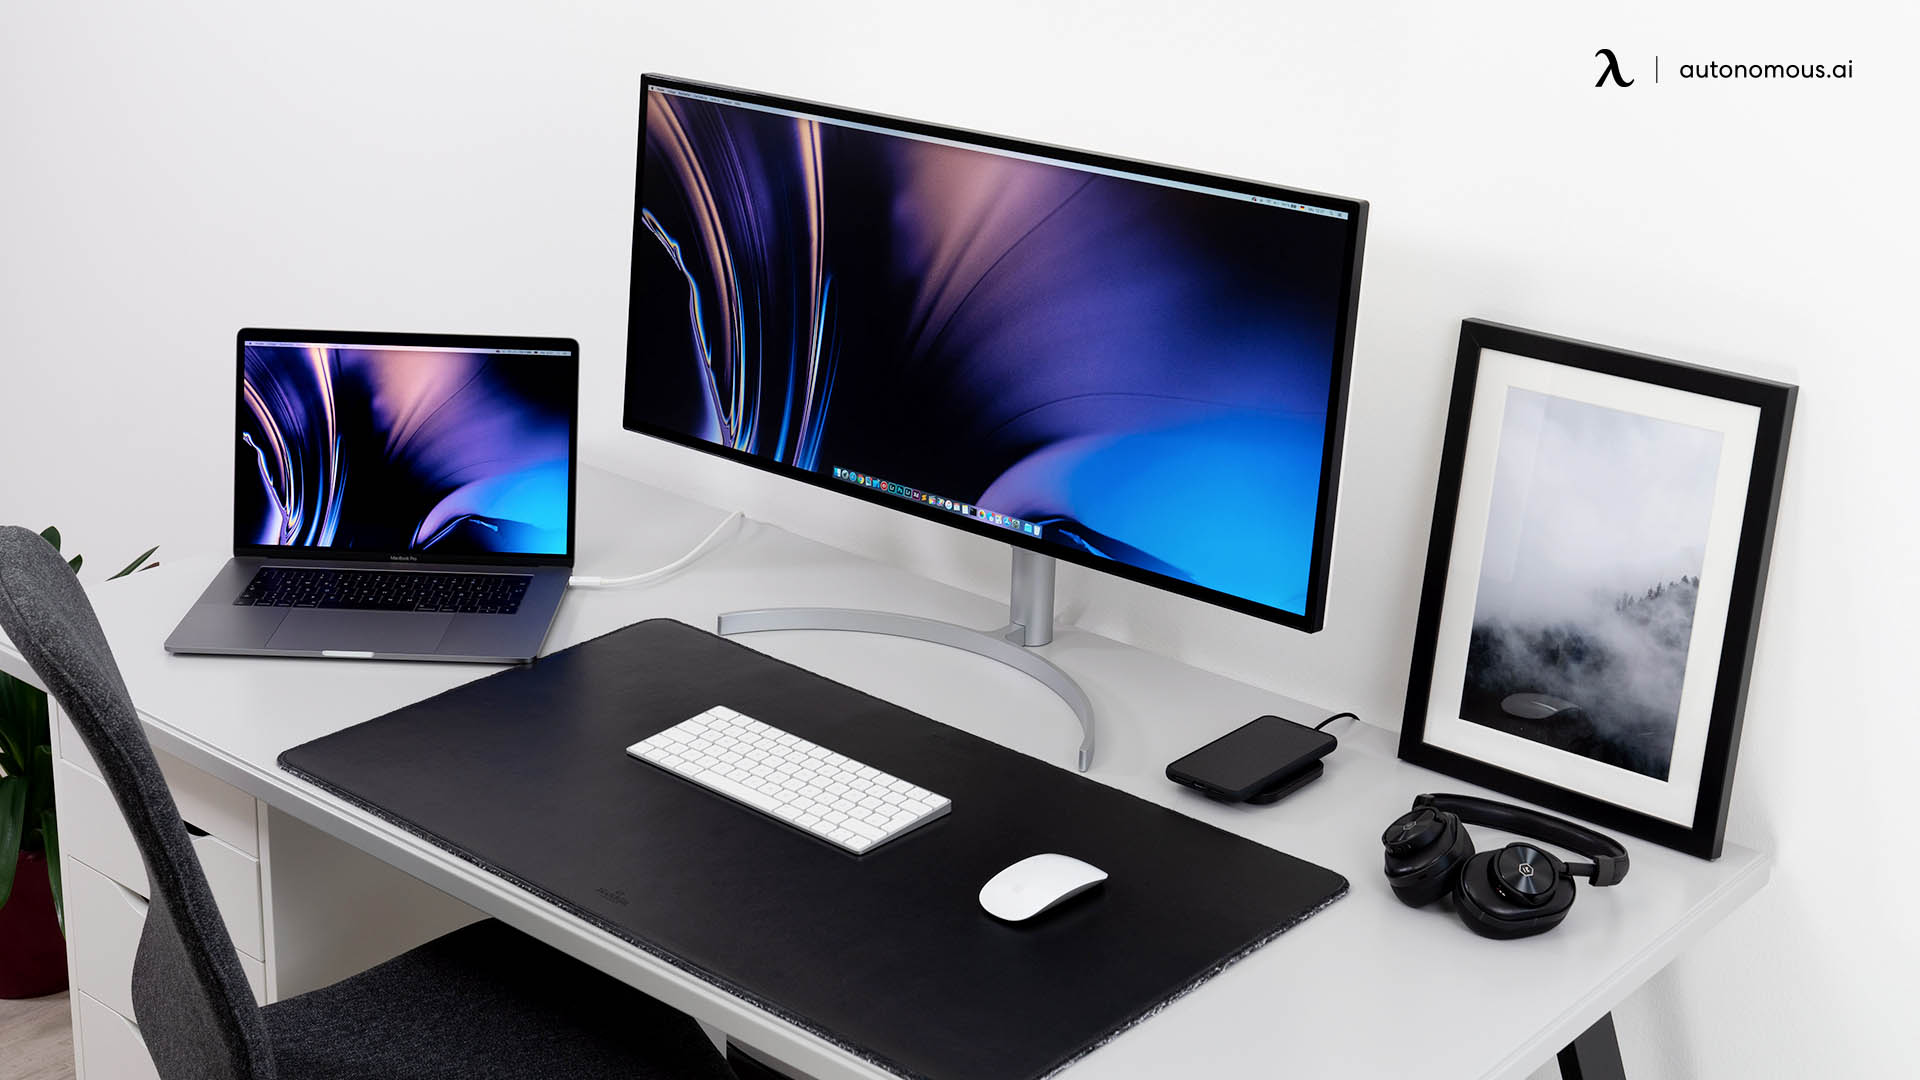 Productivity hack: arrange your workspace with these simple yet